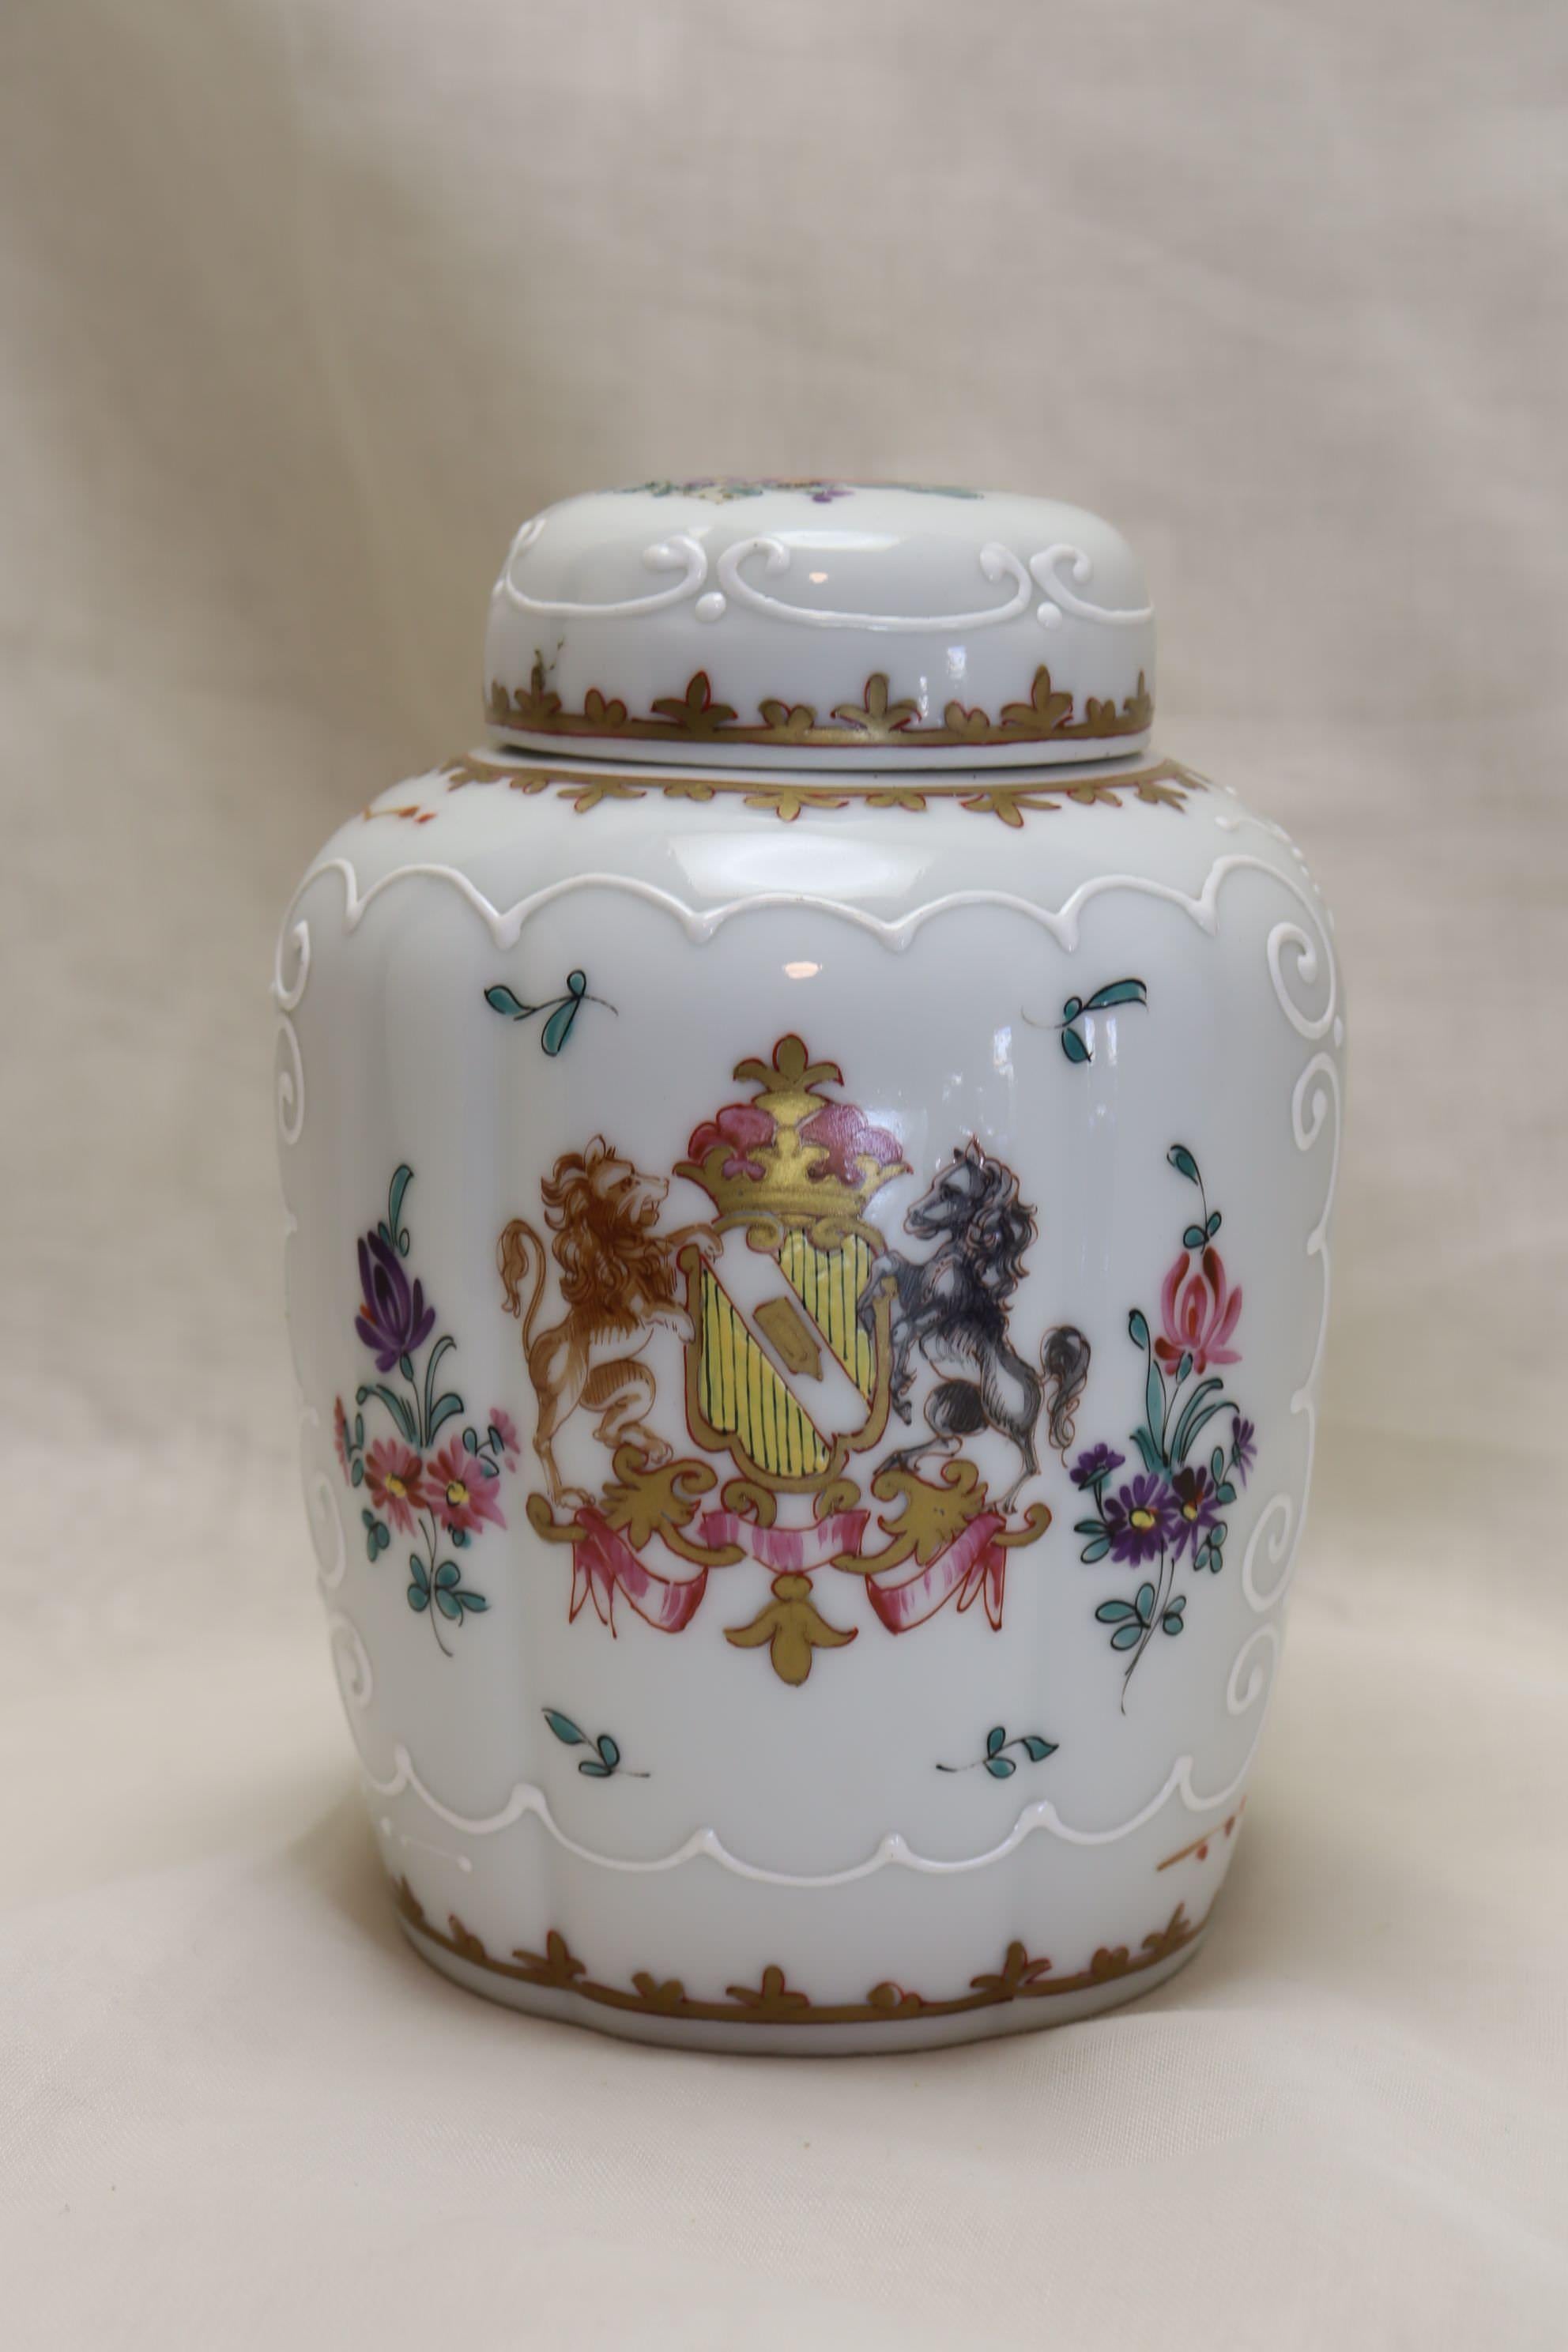 This hand painted and gilded tea canister is by Samson of Paris and is decorated with a faux armorial coat of arms on one side, and on the other with an expansive spray of flowers. The lid is also decorated with a floral spray. The decoration of the